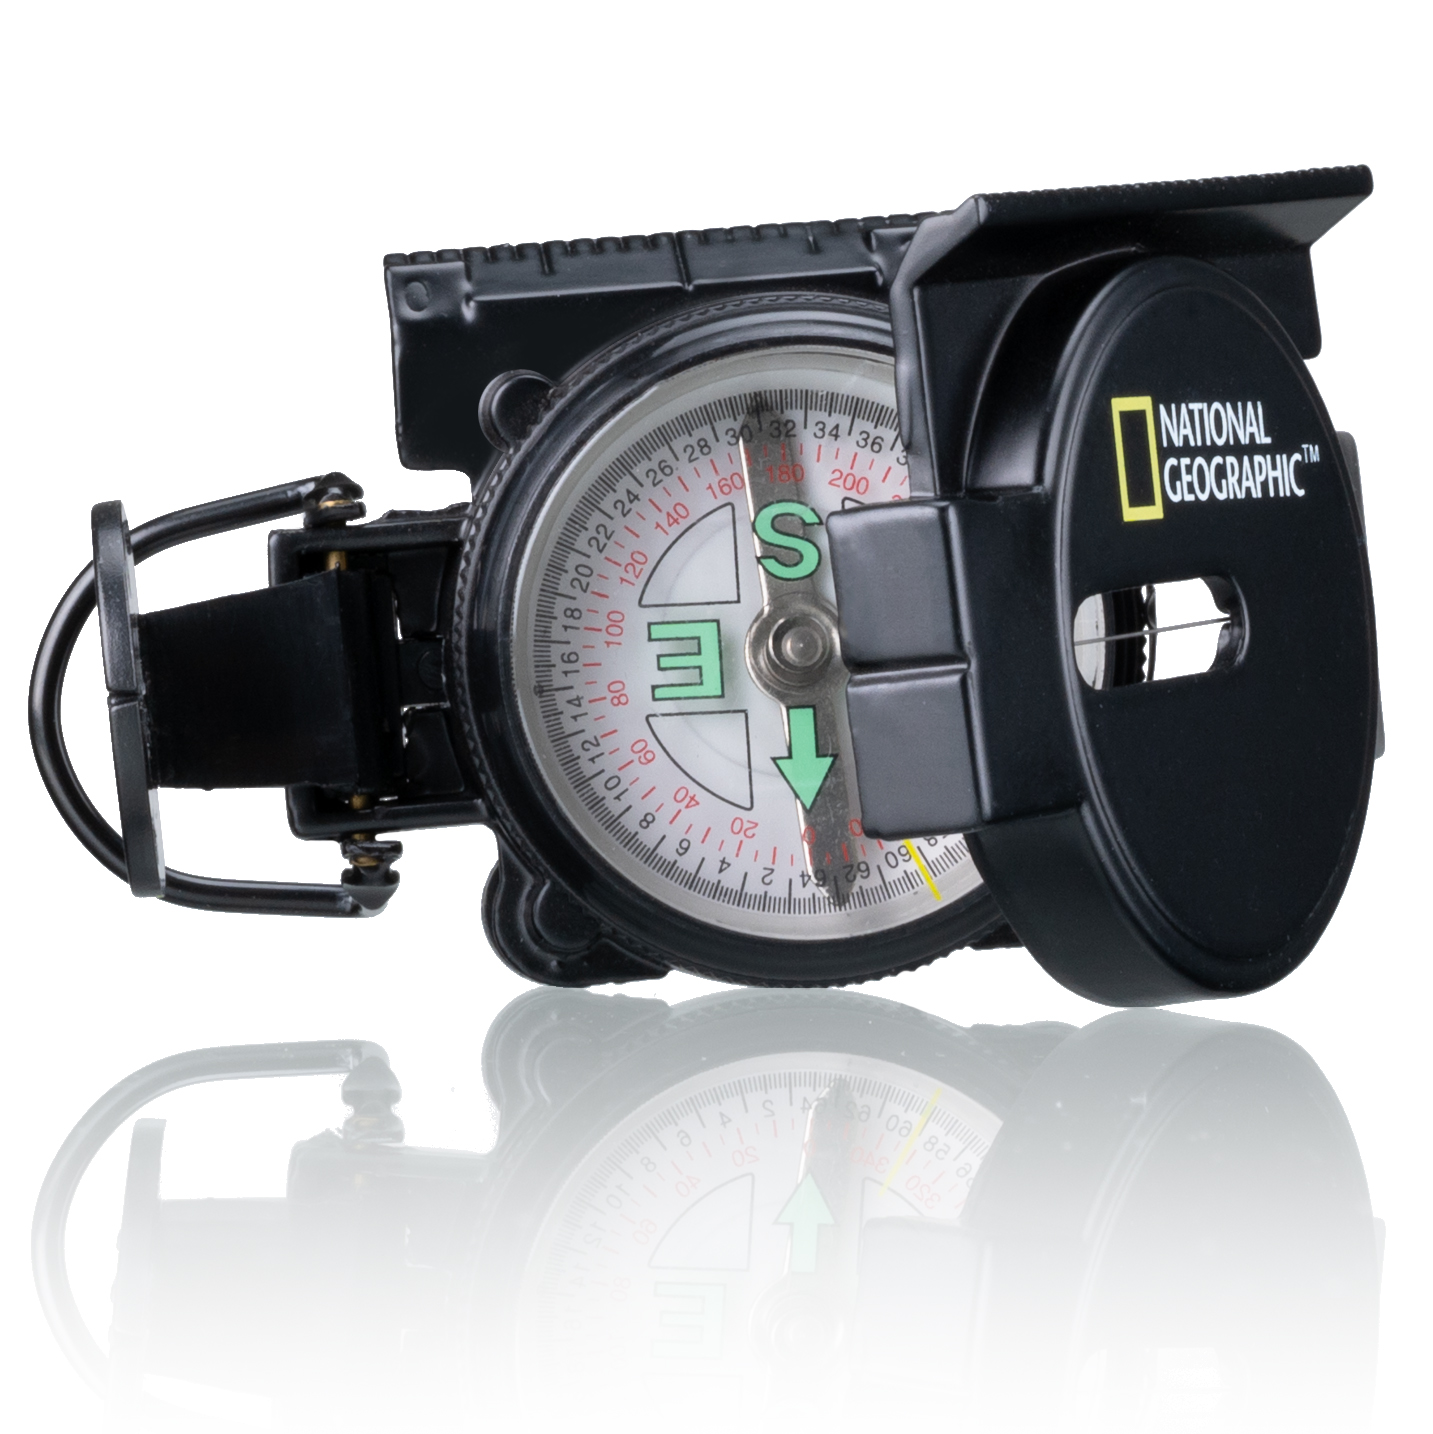 NATIONAL GEOGRAPHIC Compass